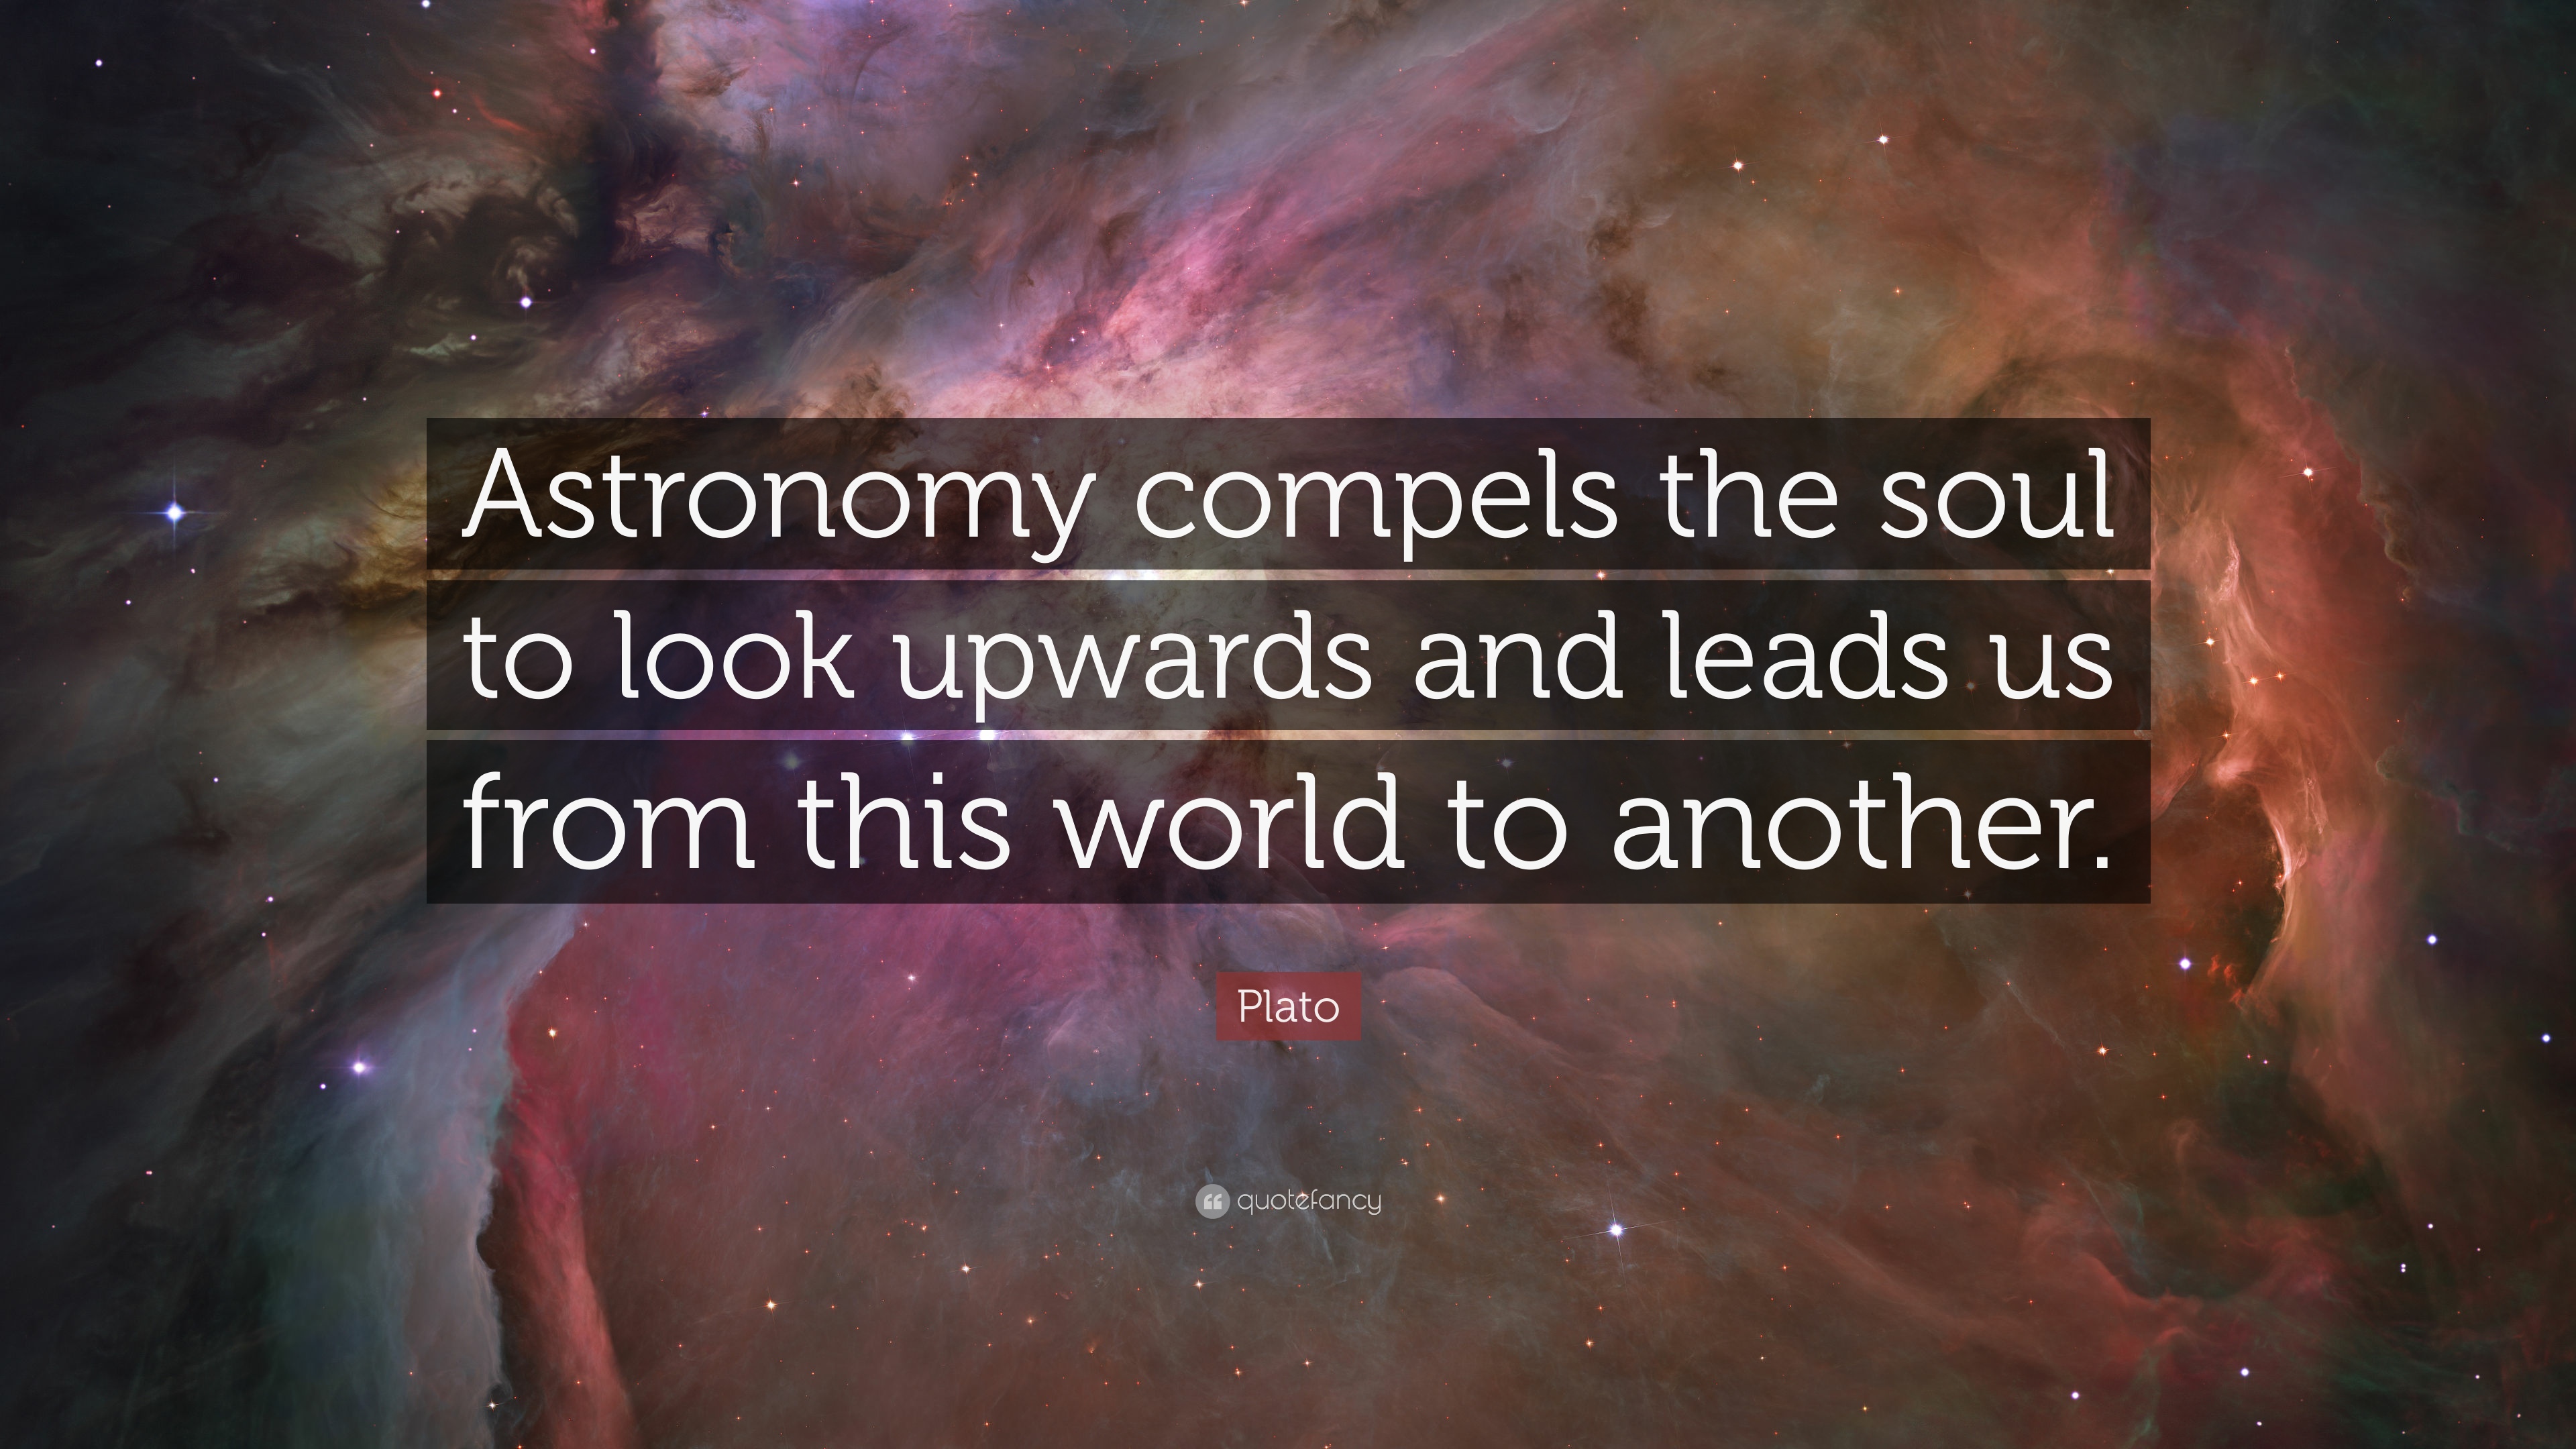 Plato Quote: “Astronomy compels the soul to look upwards and leads us from this world to